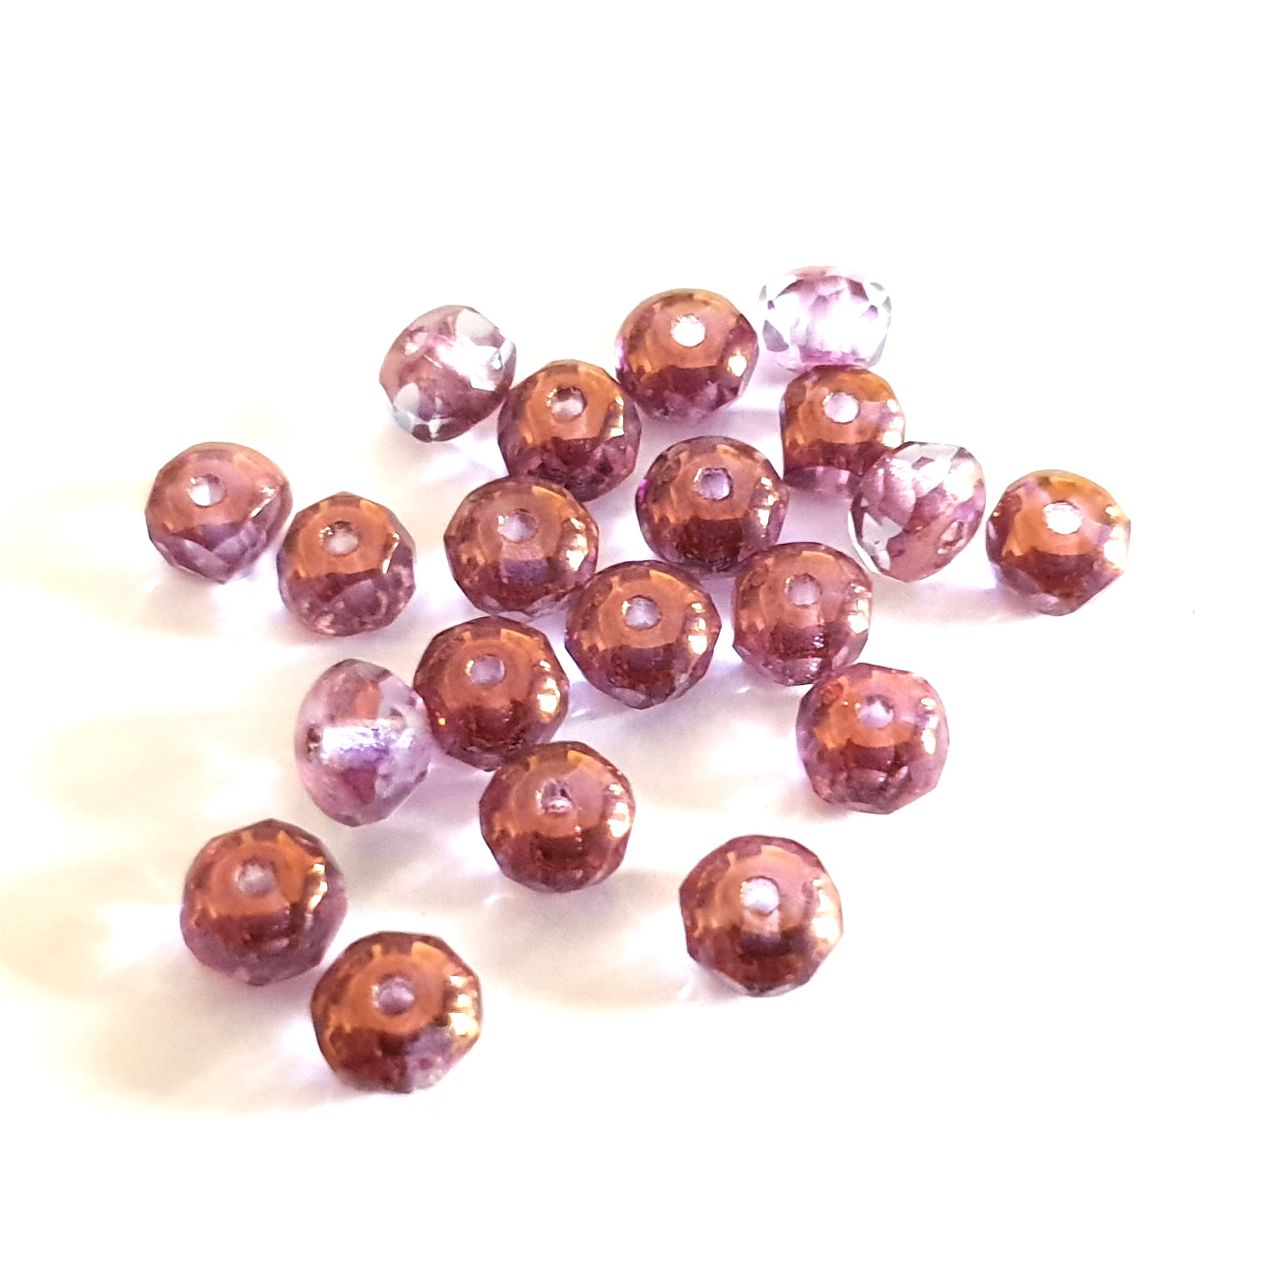 4x6mm Gemcut Rondell Lilac Transparent Lustred Fire Polished Bead